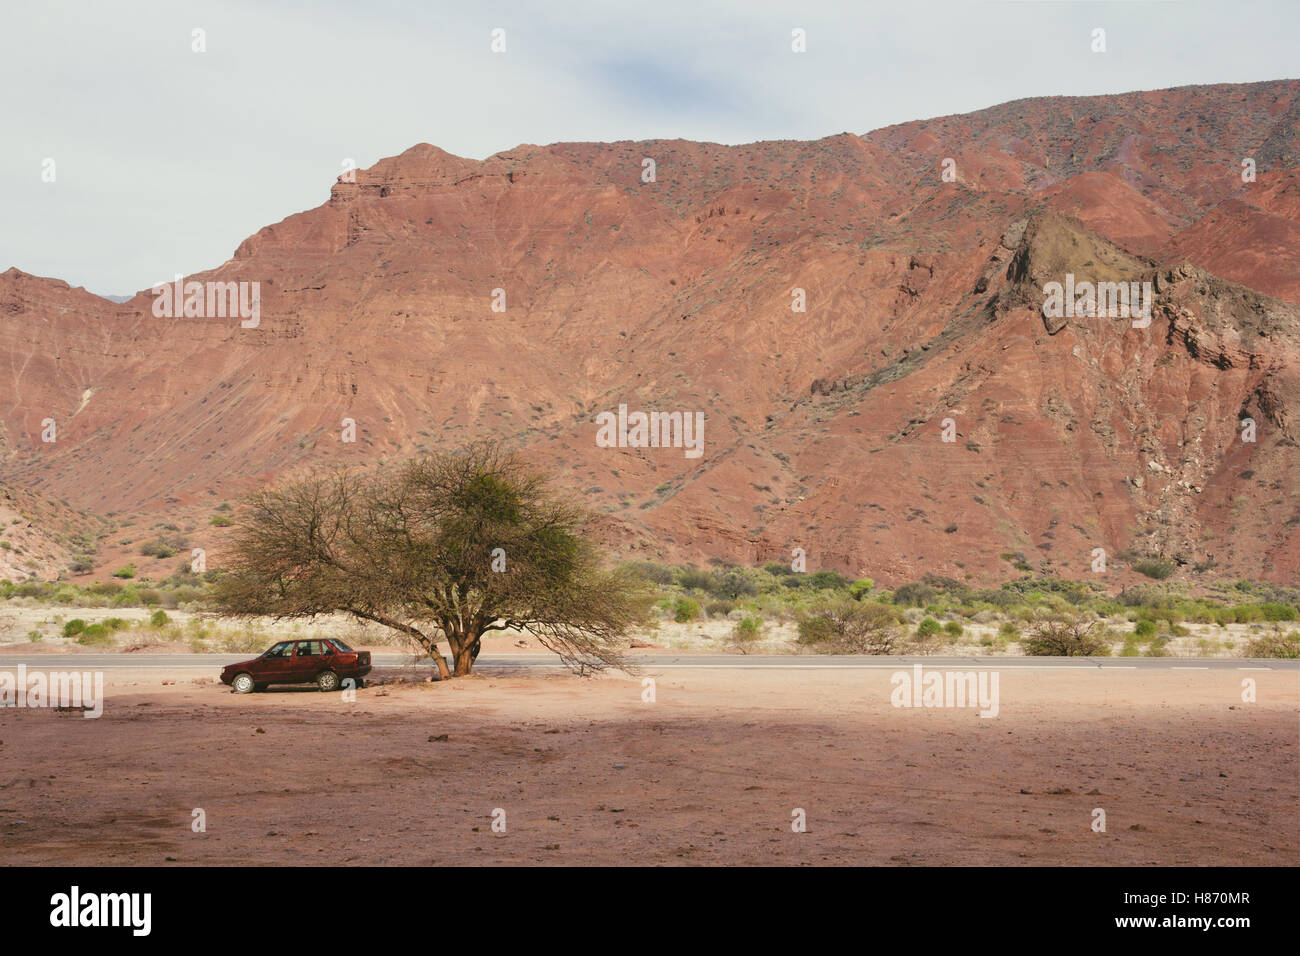 Valles Calchaquíes in Northern Argentina. Road view with a car parked under a tree Stock Photo